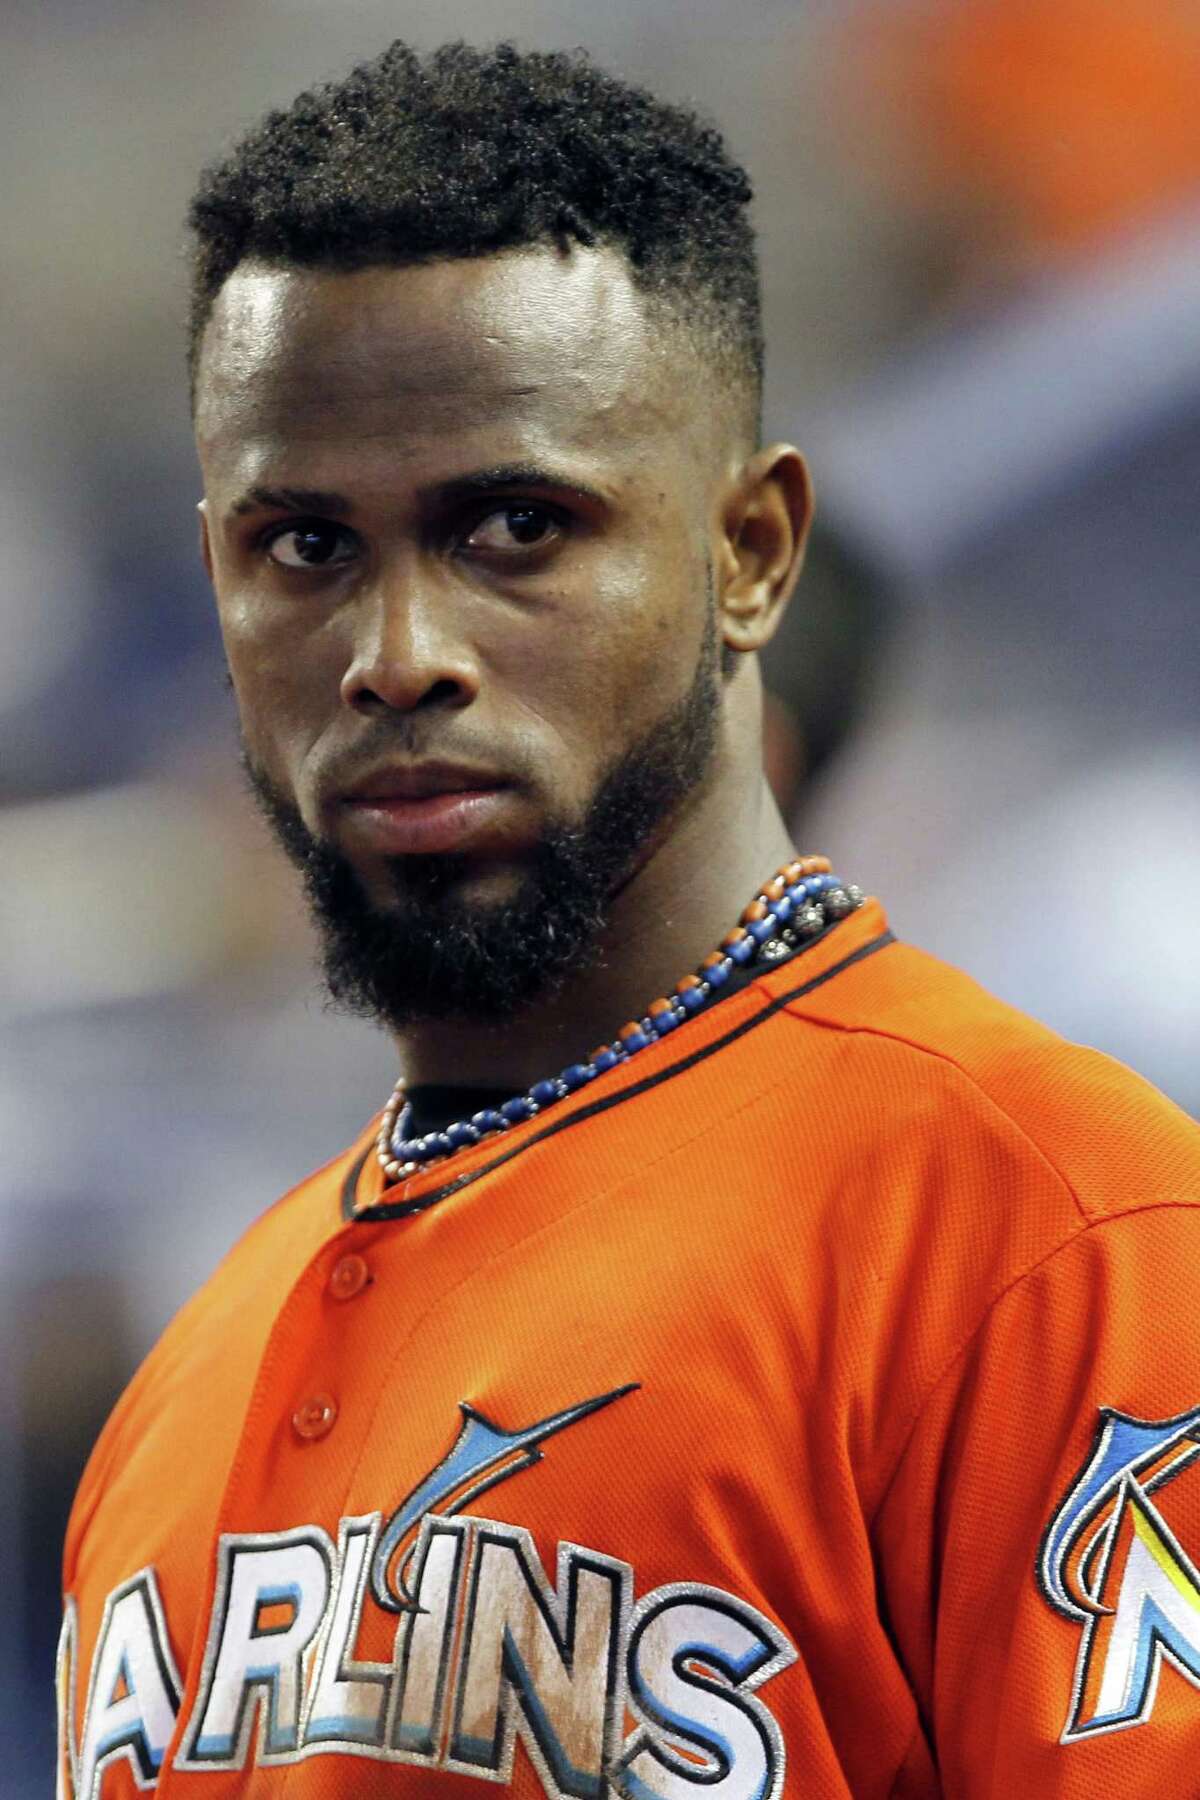 FILE - In this Sept. 2, 2012, file photo, Miami Marlins shortstop Jose Reyes appears in the dugout during a baseball game against the New York Mets in Miami. A person familiar with the deal told The Associated Press on condition of anonymity Tuesday, Nov. 13, that the Marlins have traded Reyes to the Toronto Blue Jays. (AP Photo/Alan Diaz, File)